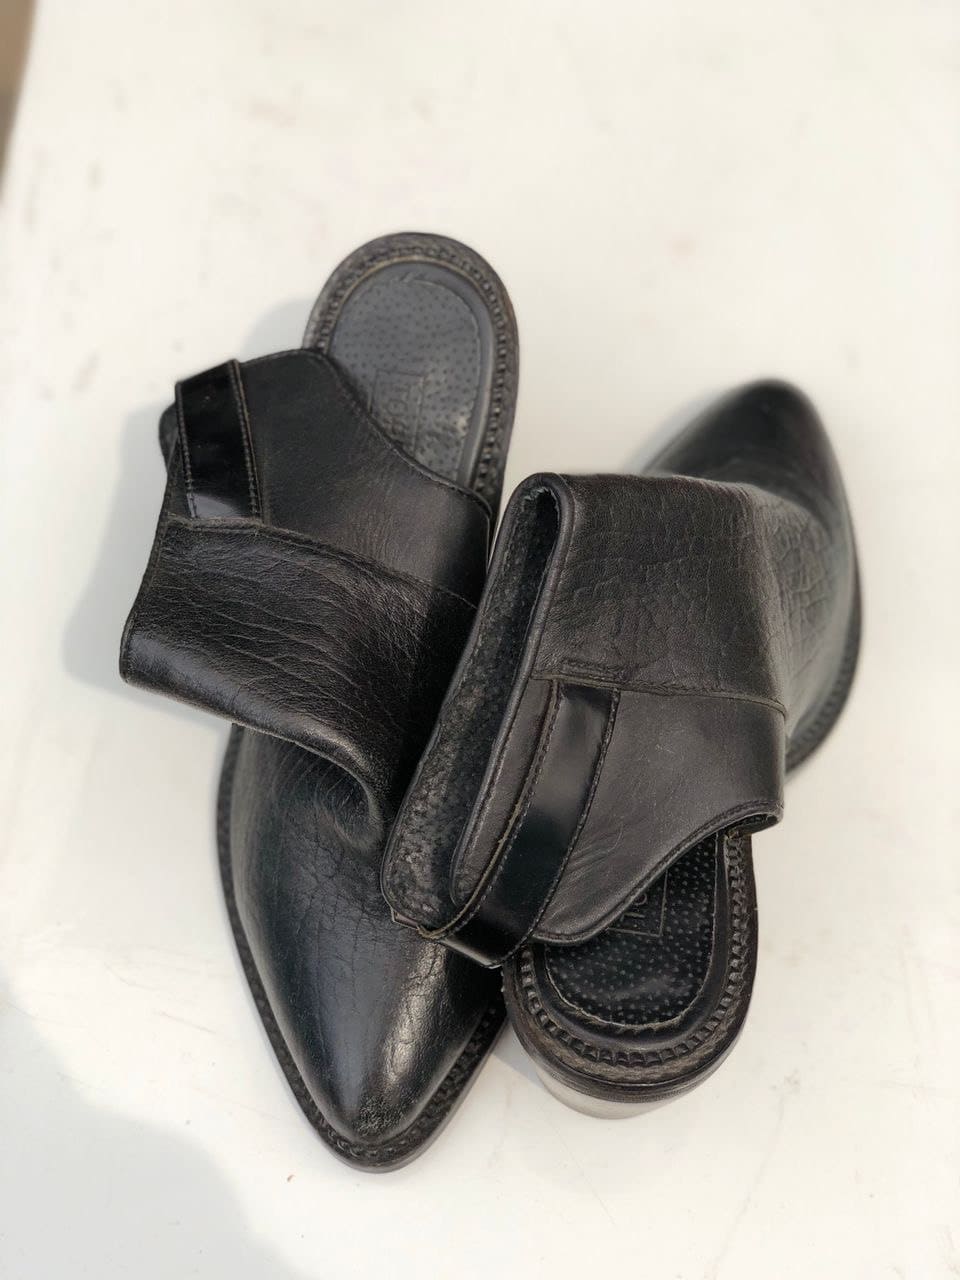 NeasFashion product - Black leather slides for women